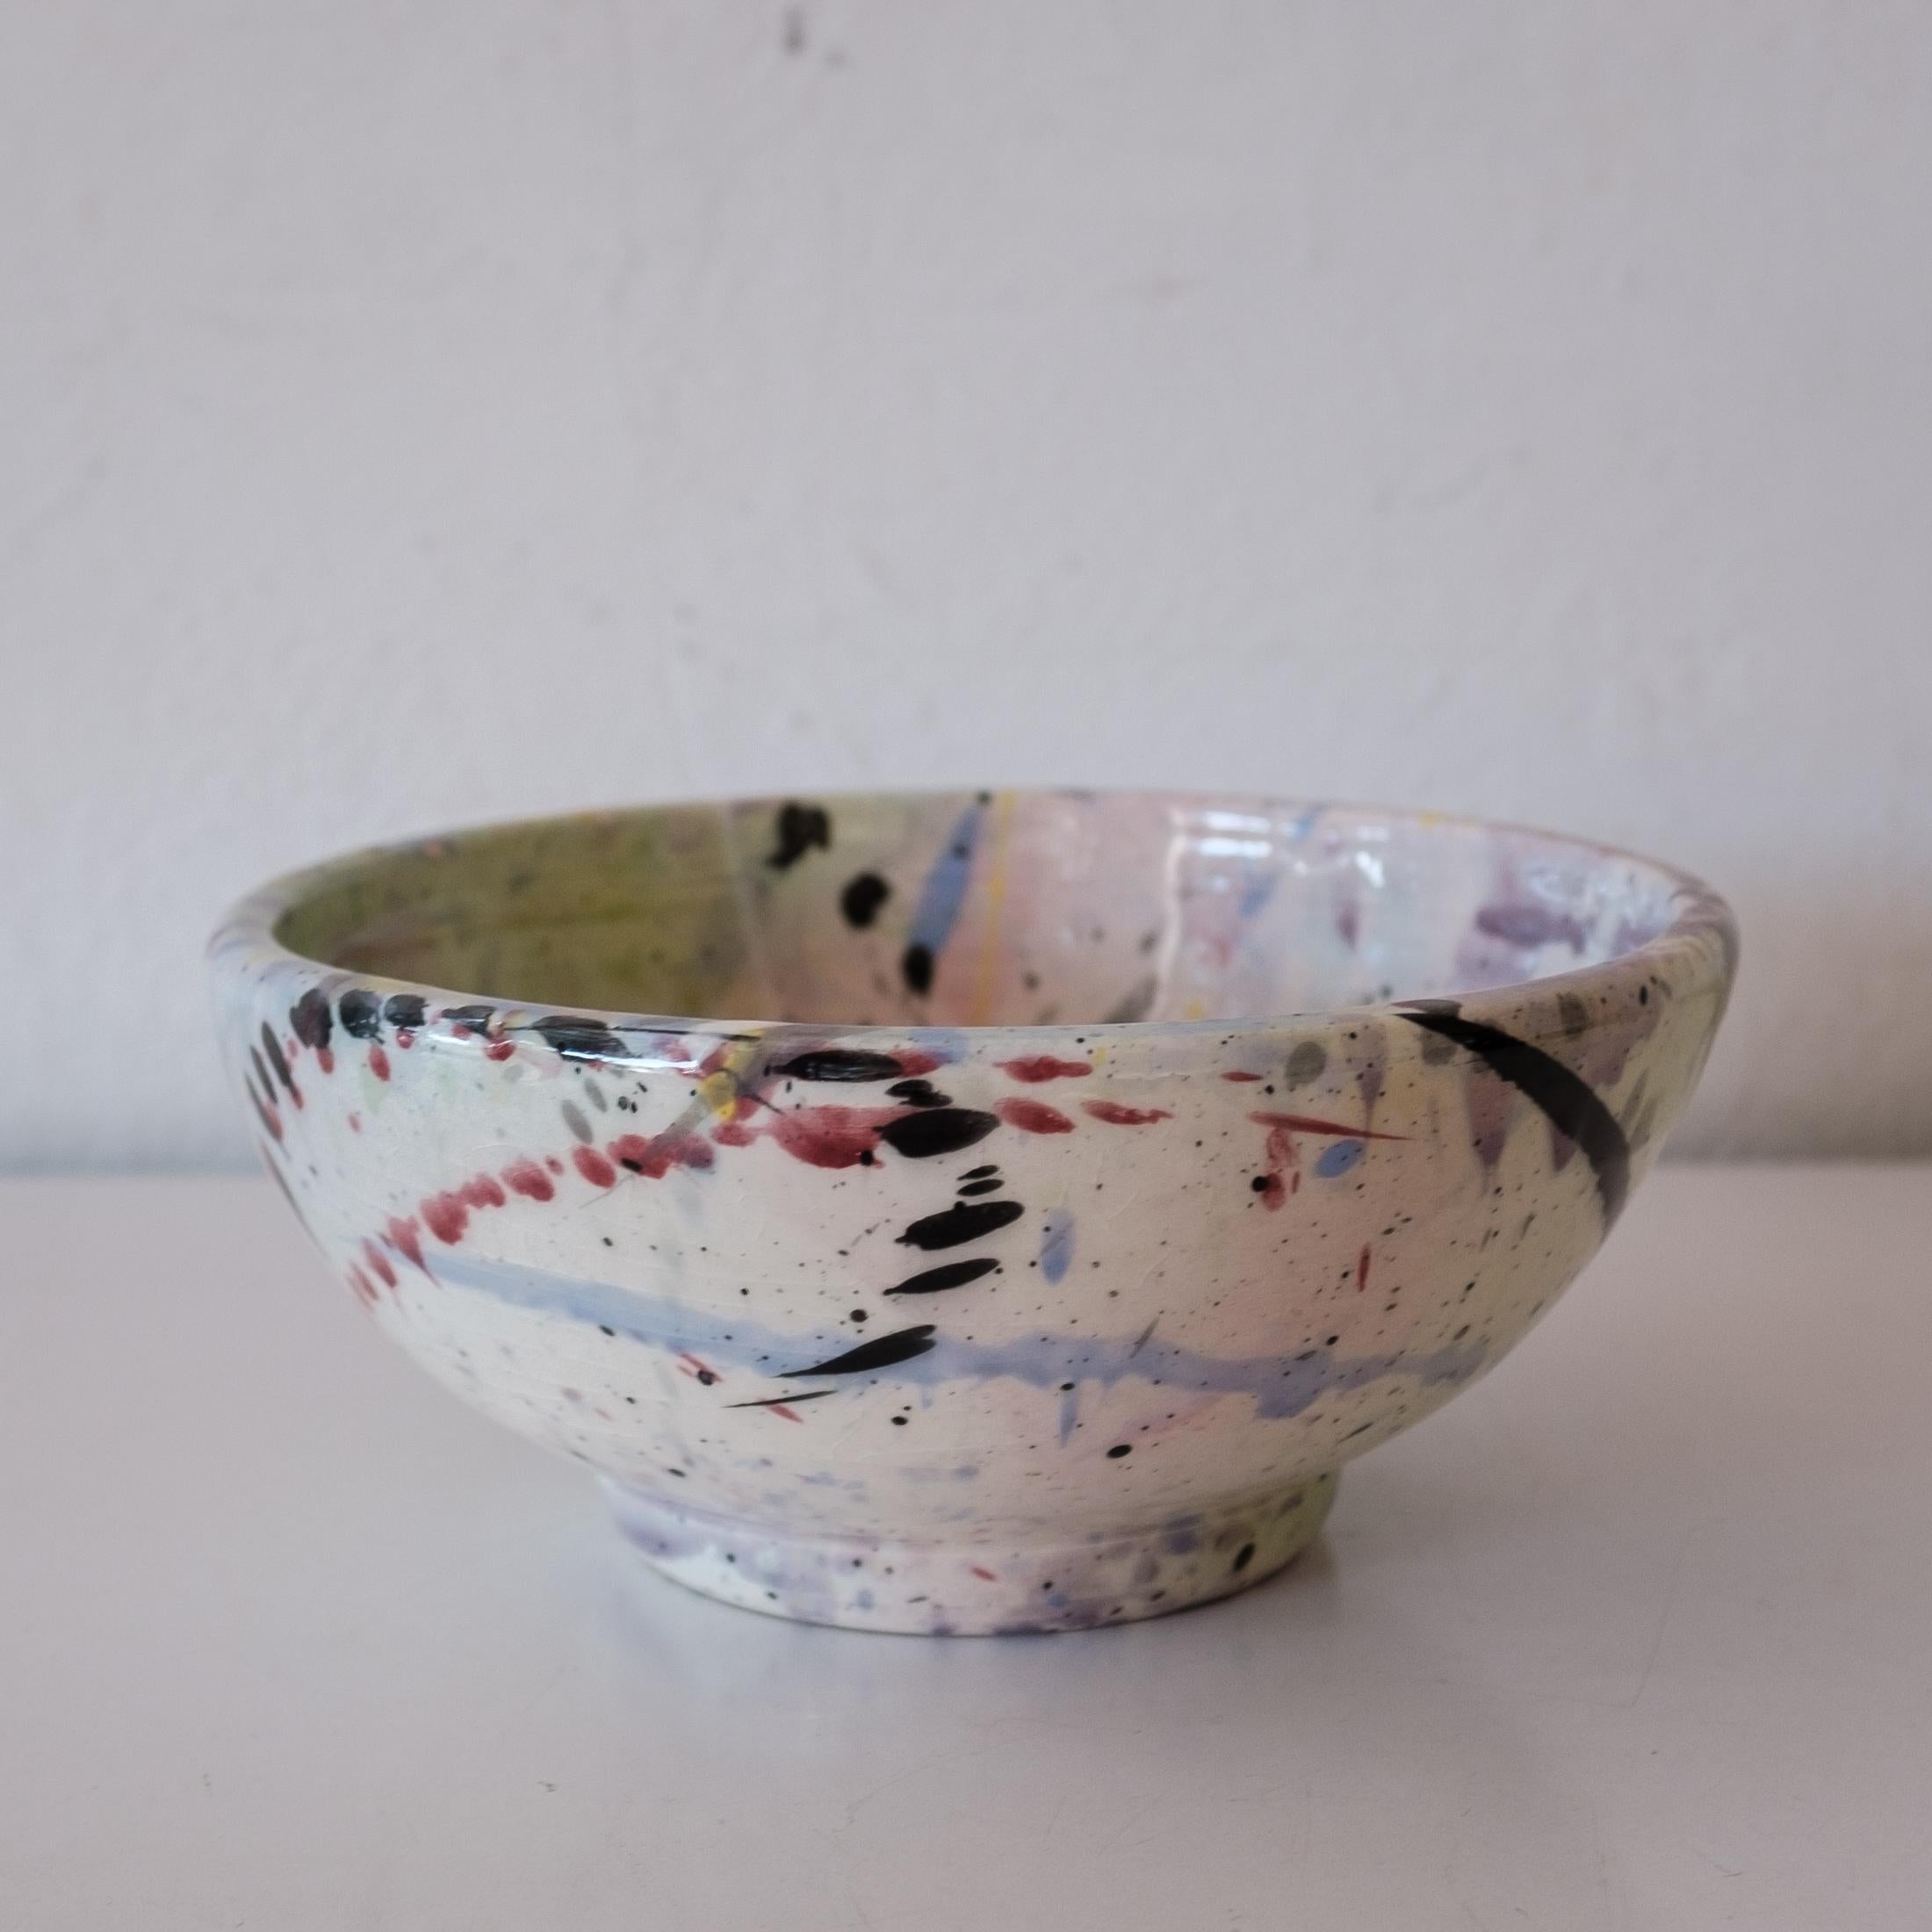 American Peter Shire Ceramic Splatter Bowl for Los Angeles County Museum of Art, 1984